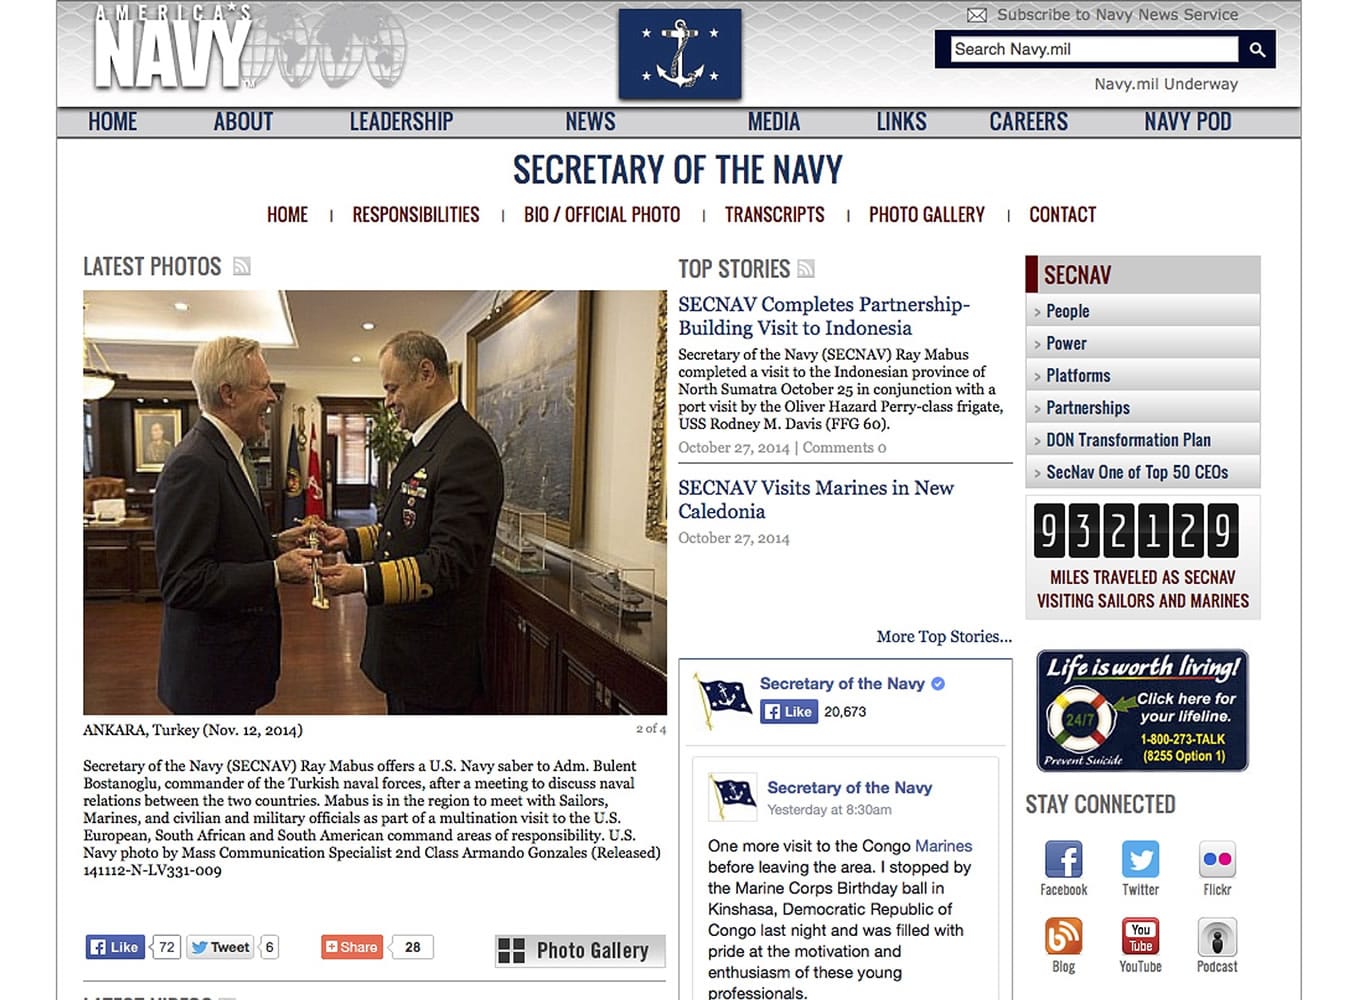 This frame grab of the U.S. Navy website shows a mileage counter, right, of Navy Secretary Ray Mabus travels.